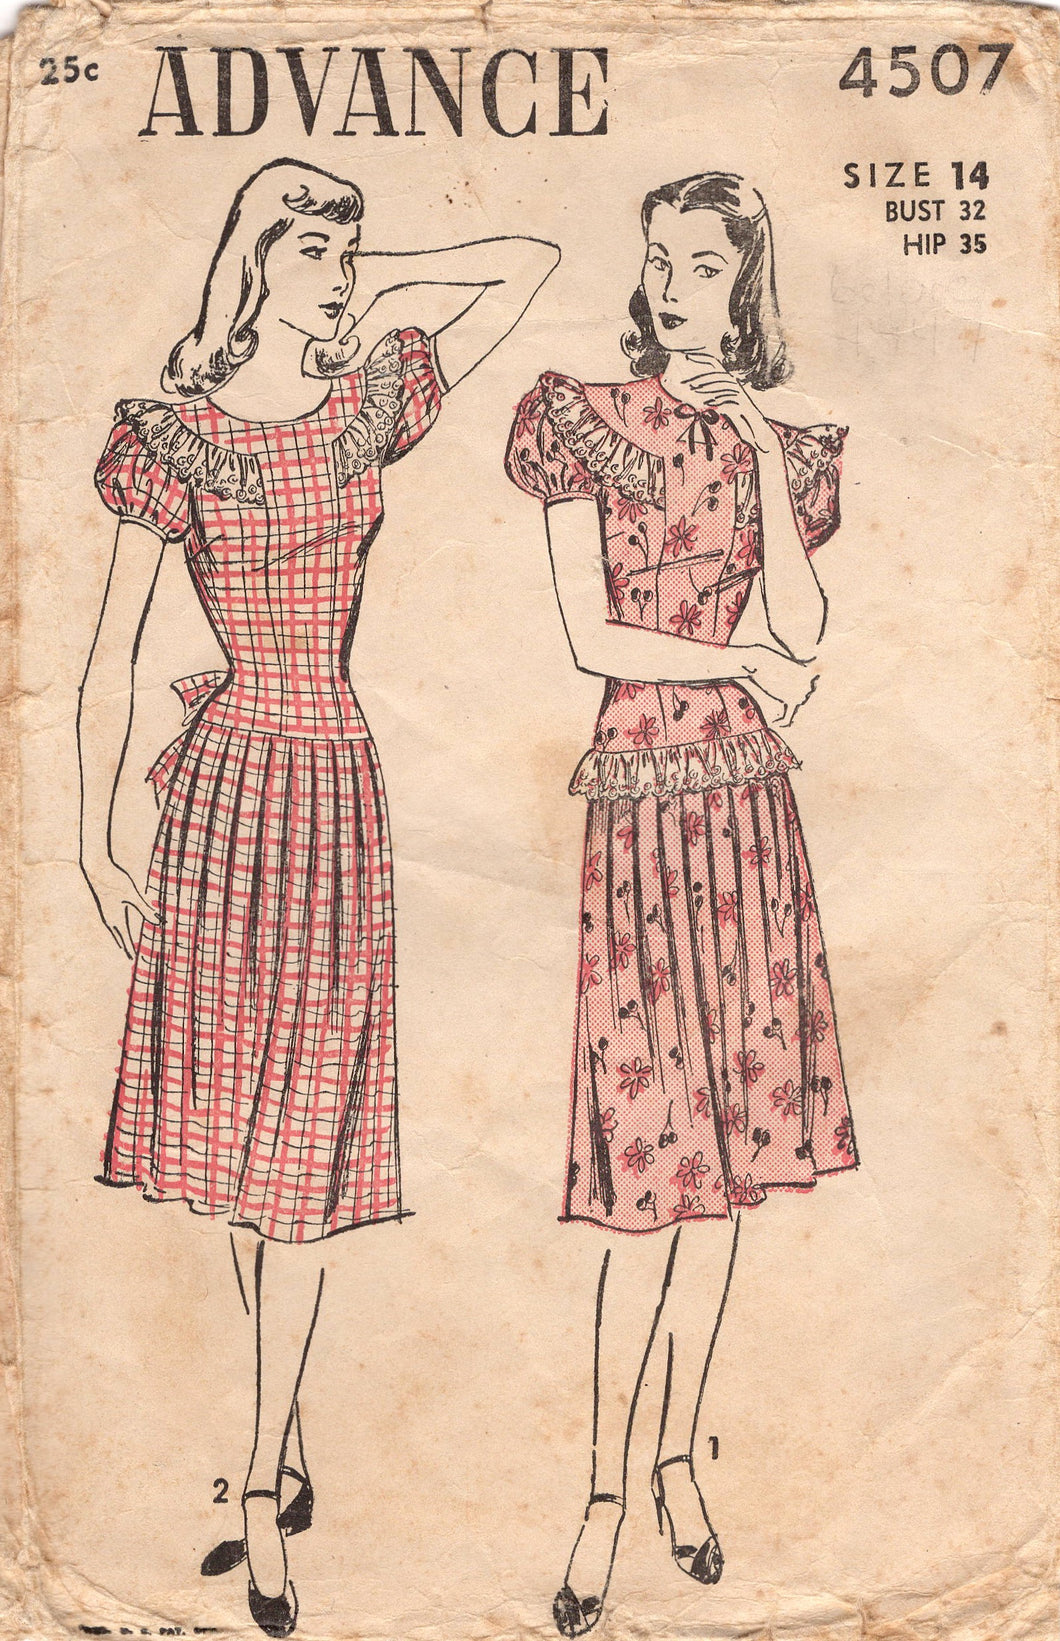 1940's Advance Drop Waist Day Dress with Bow Accent - Bust 32